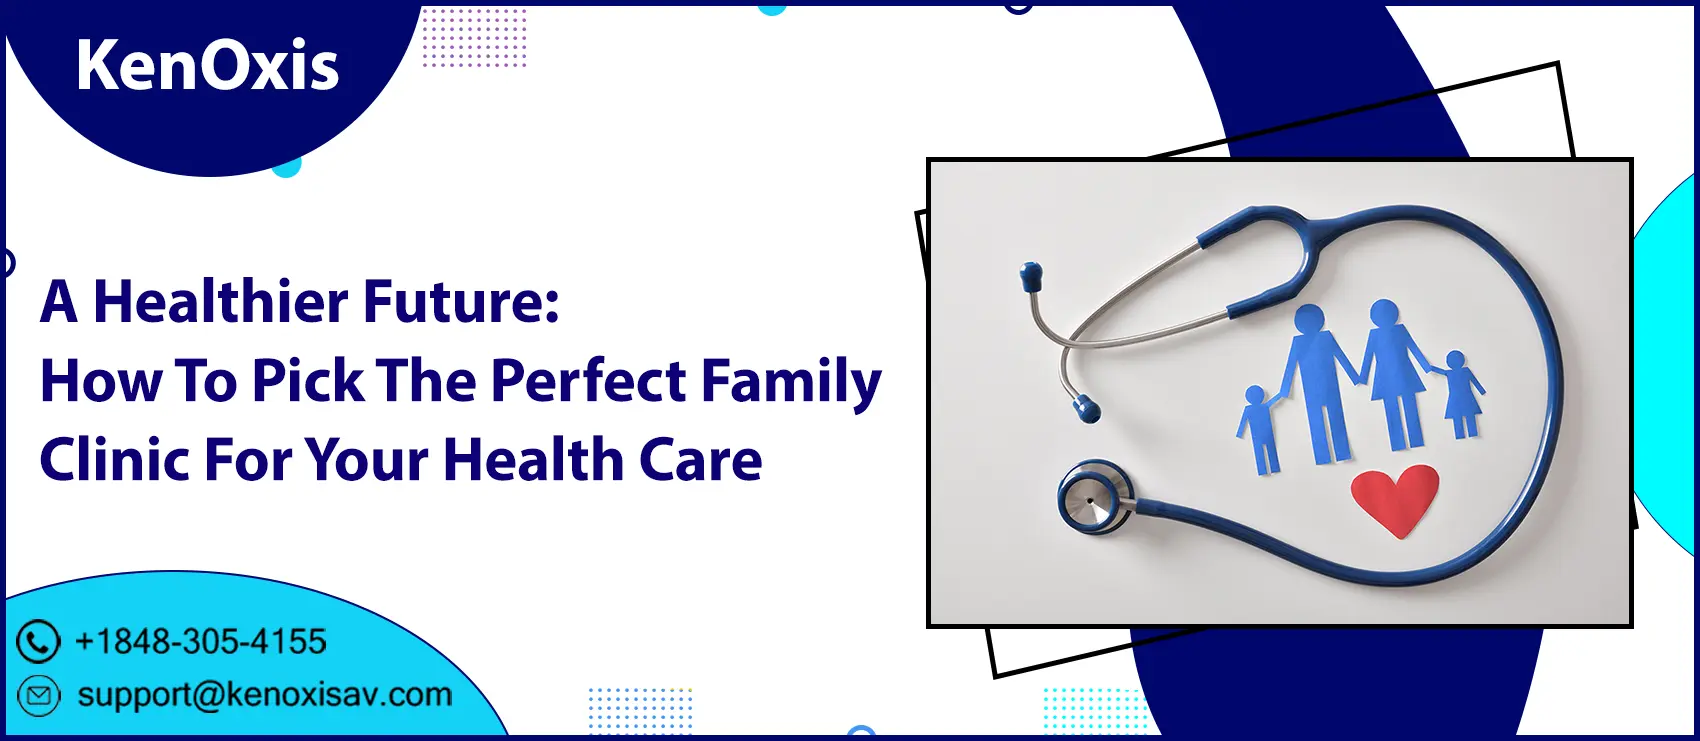 A Healthier Future: How To Pick The Perfect Family Clinic For Your Health Care